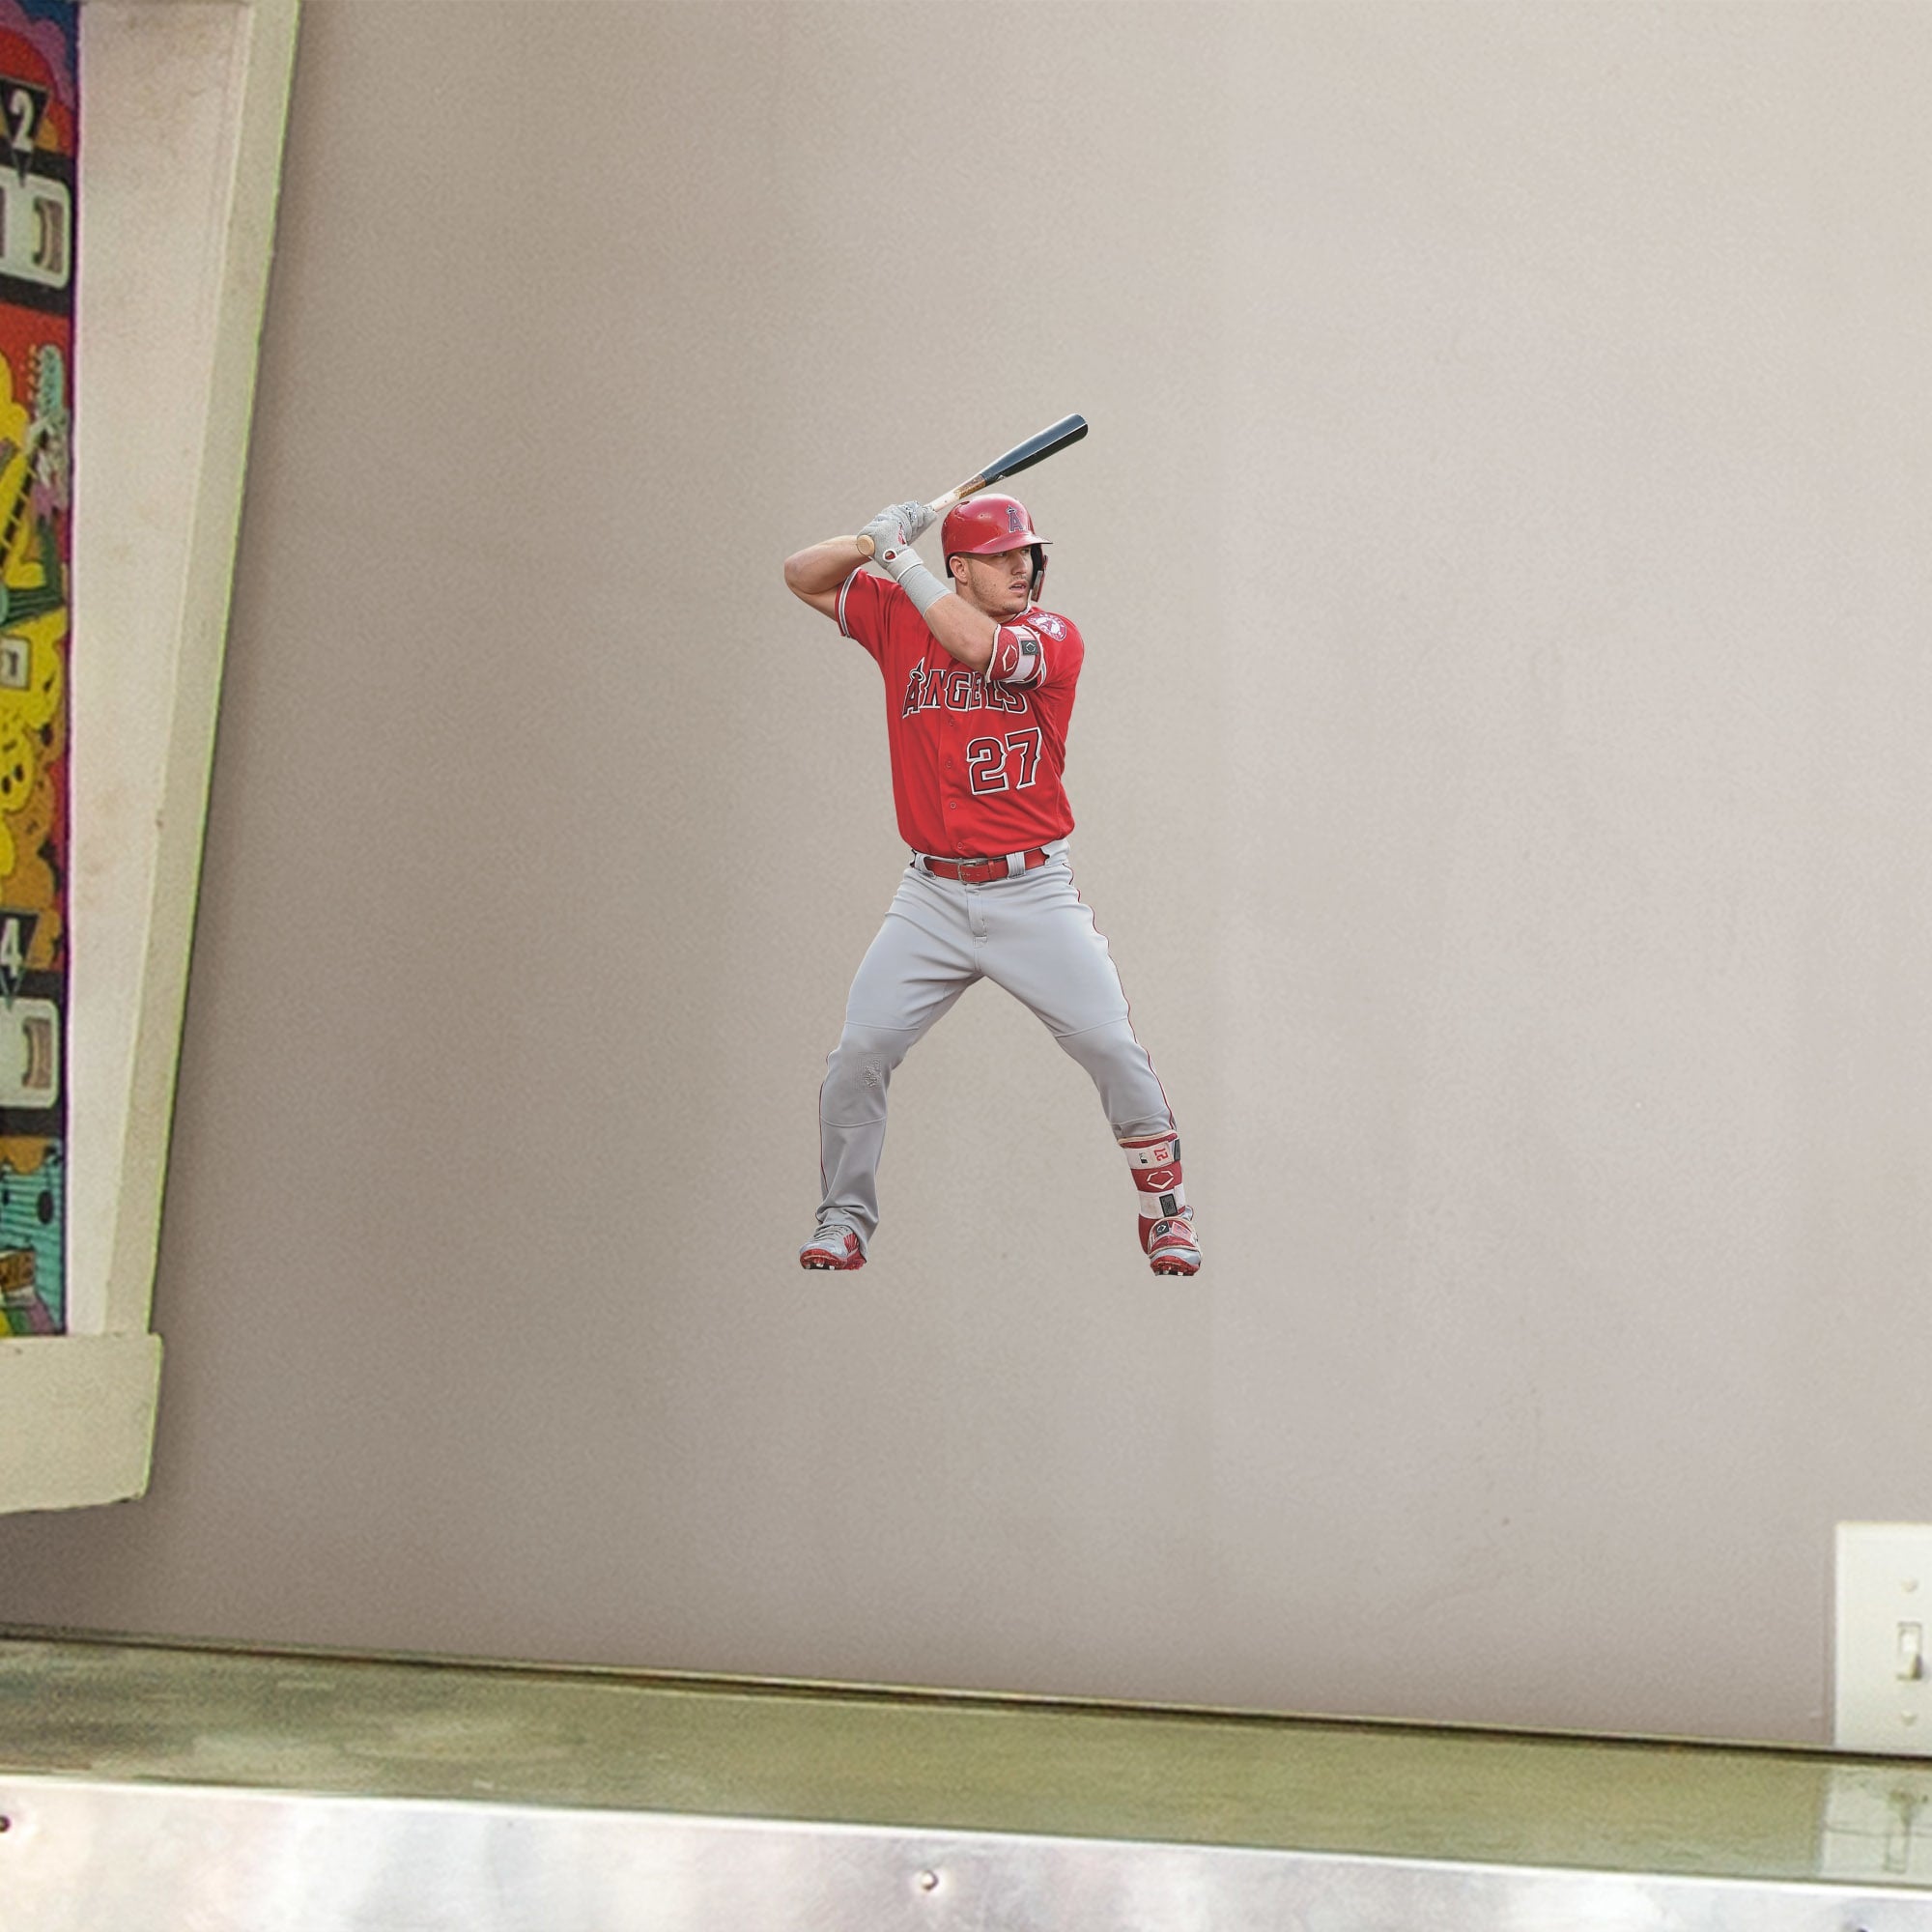 Mike Trout for LA Angels: At Bat - Officially Licensed MLB Removable Wall Decal Large by Fathead | Vinyl